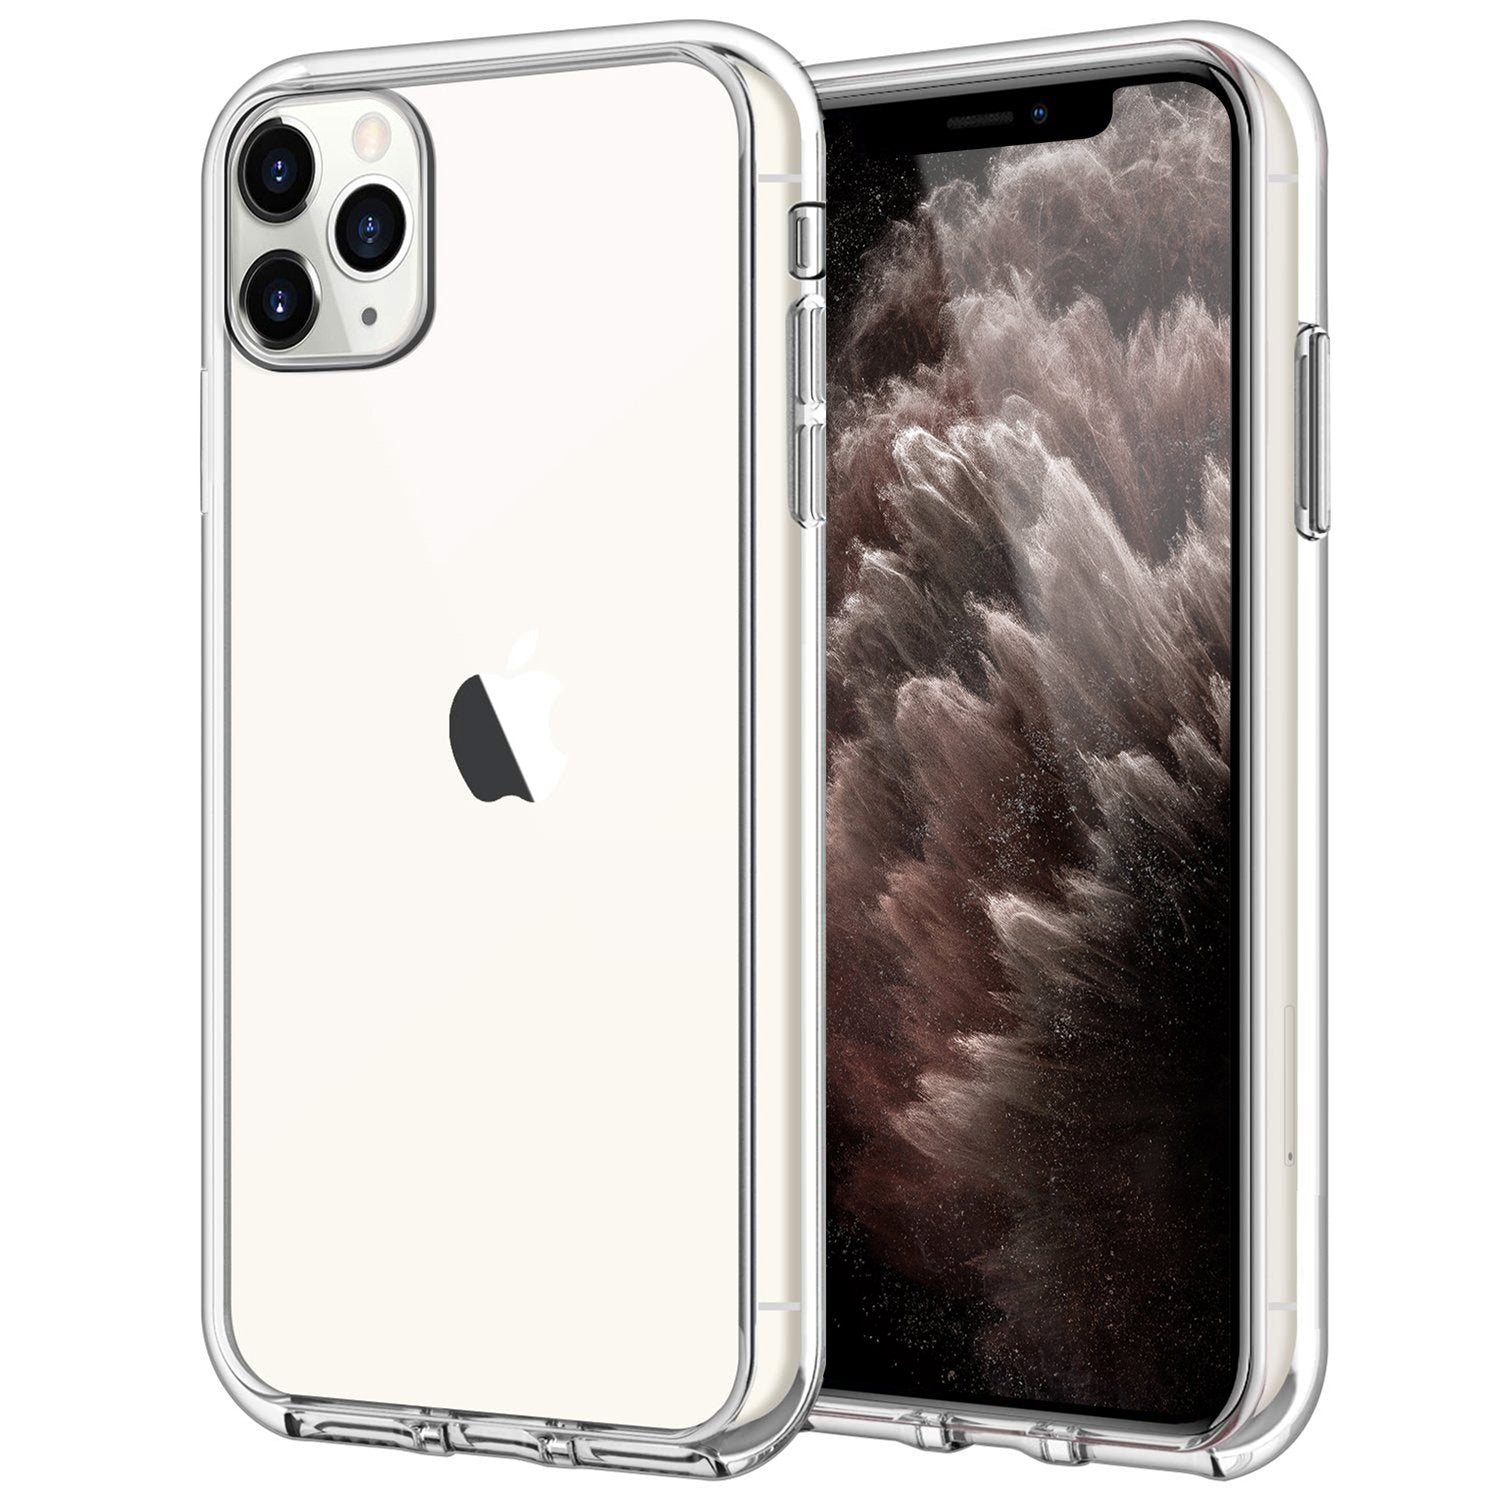 Case for iPhone 11 Pro Shock Proof Soft TPU Silicone Phone Clear Slim Cover